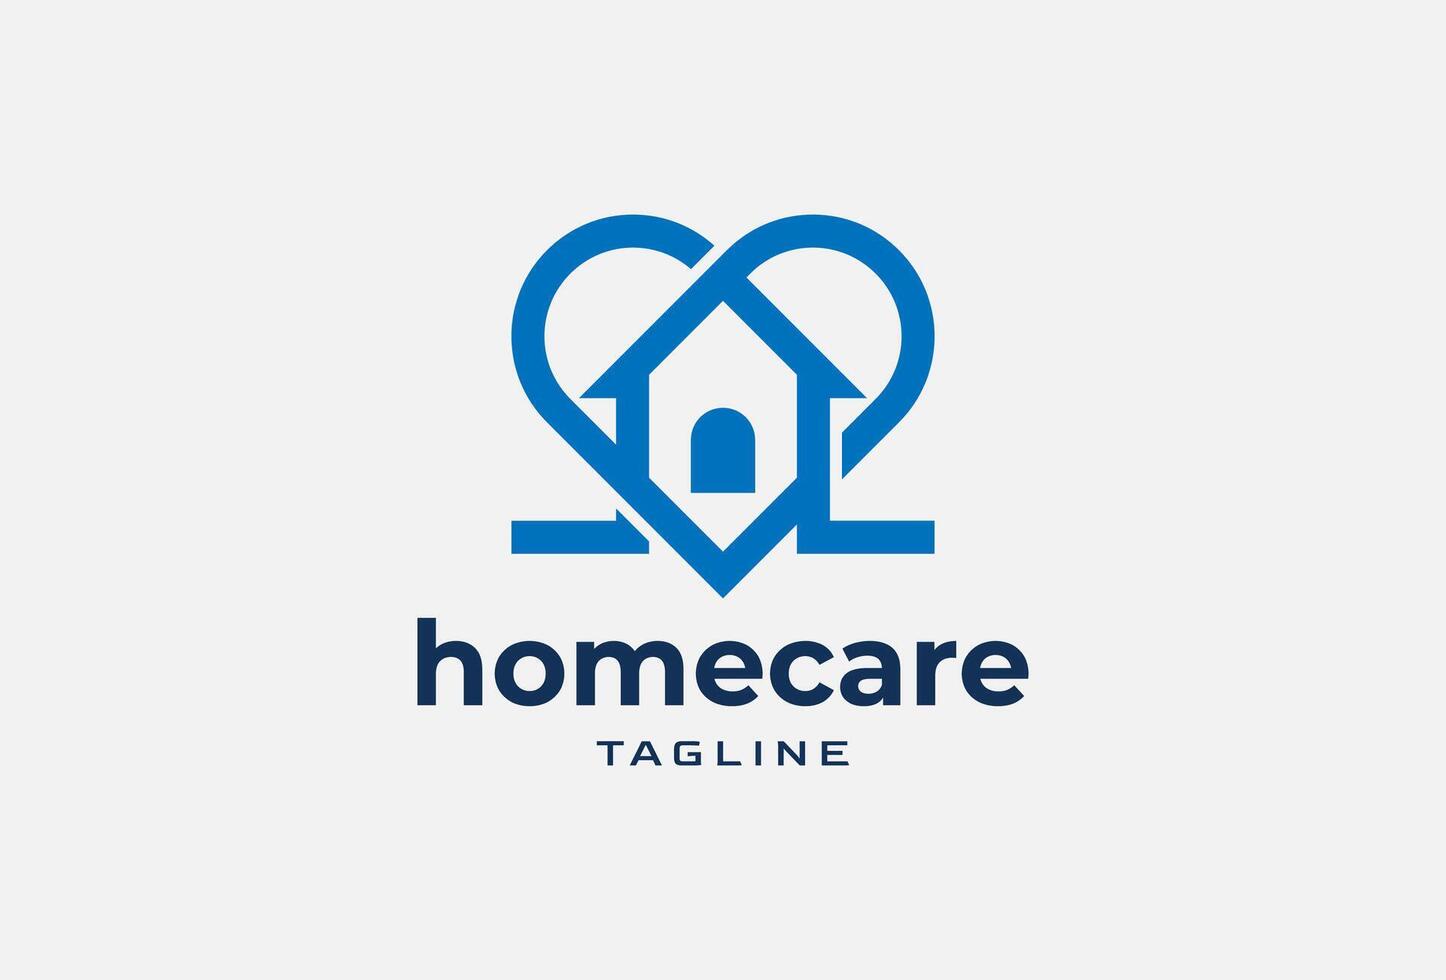 homecare logo, home with heart combination, usable for brand and business logos, flat design logo template, illustration vector